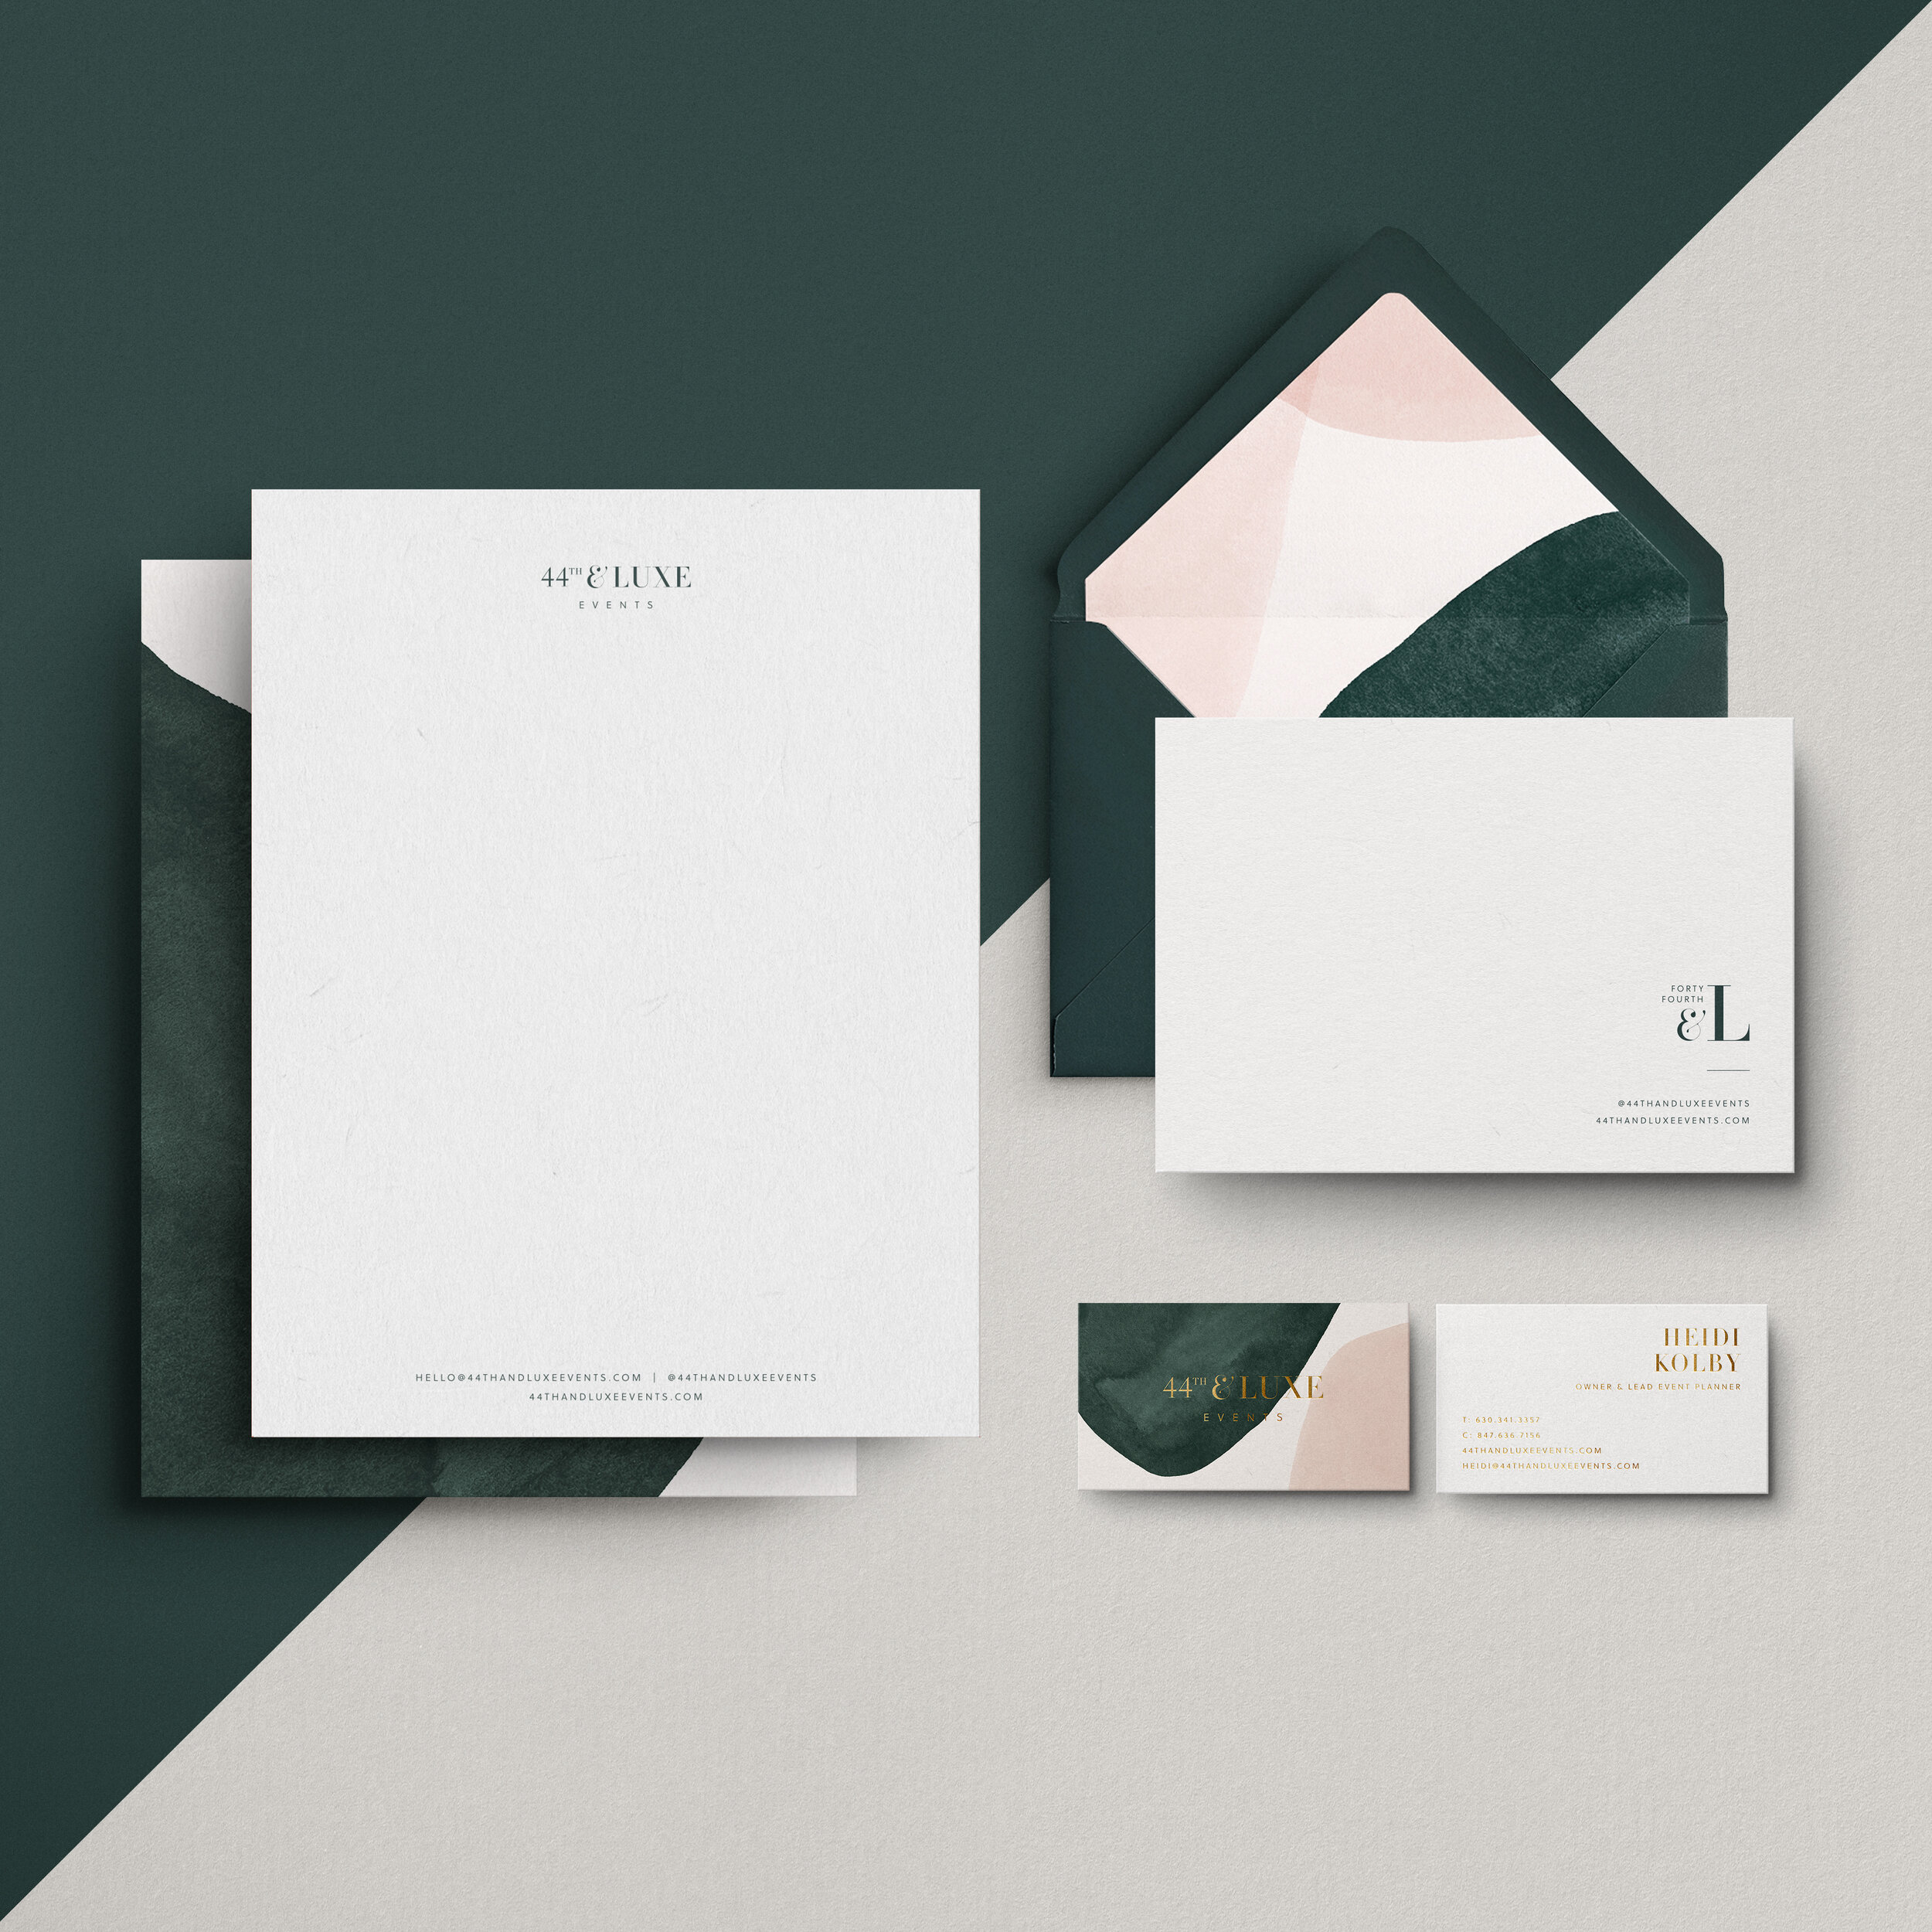 44th &amp; Luxe Events Emerald Green and Gold Foil Stationery